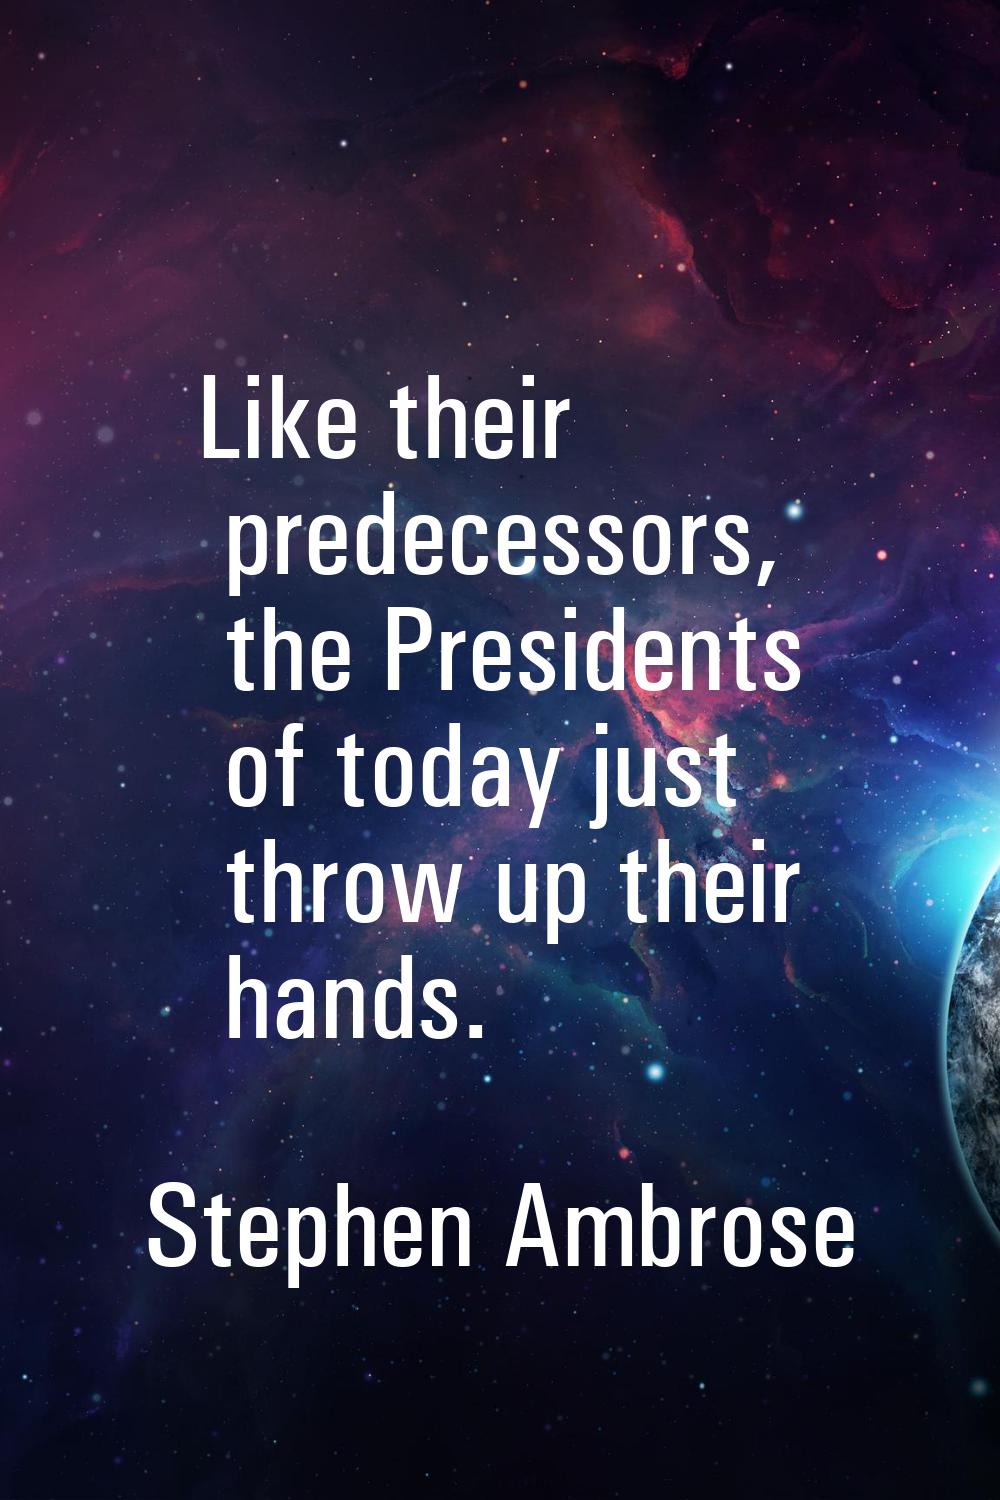 Like their predecessors, the Presidents of today just throw up their hands.